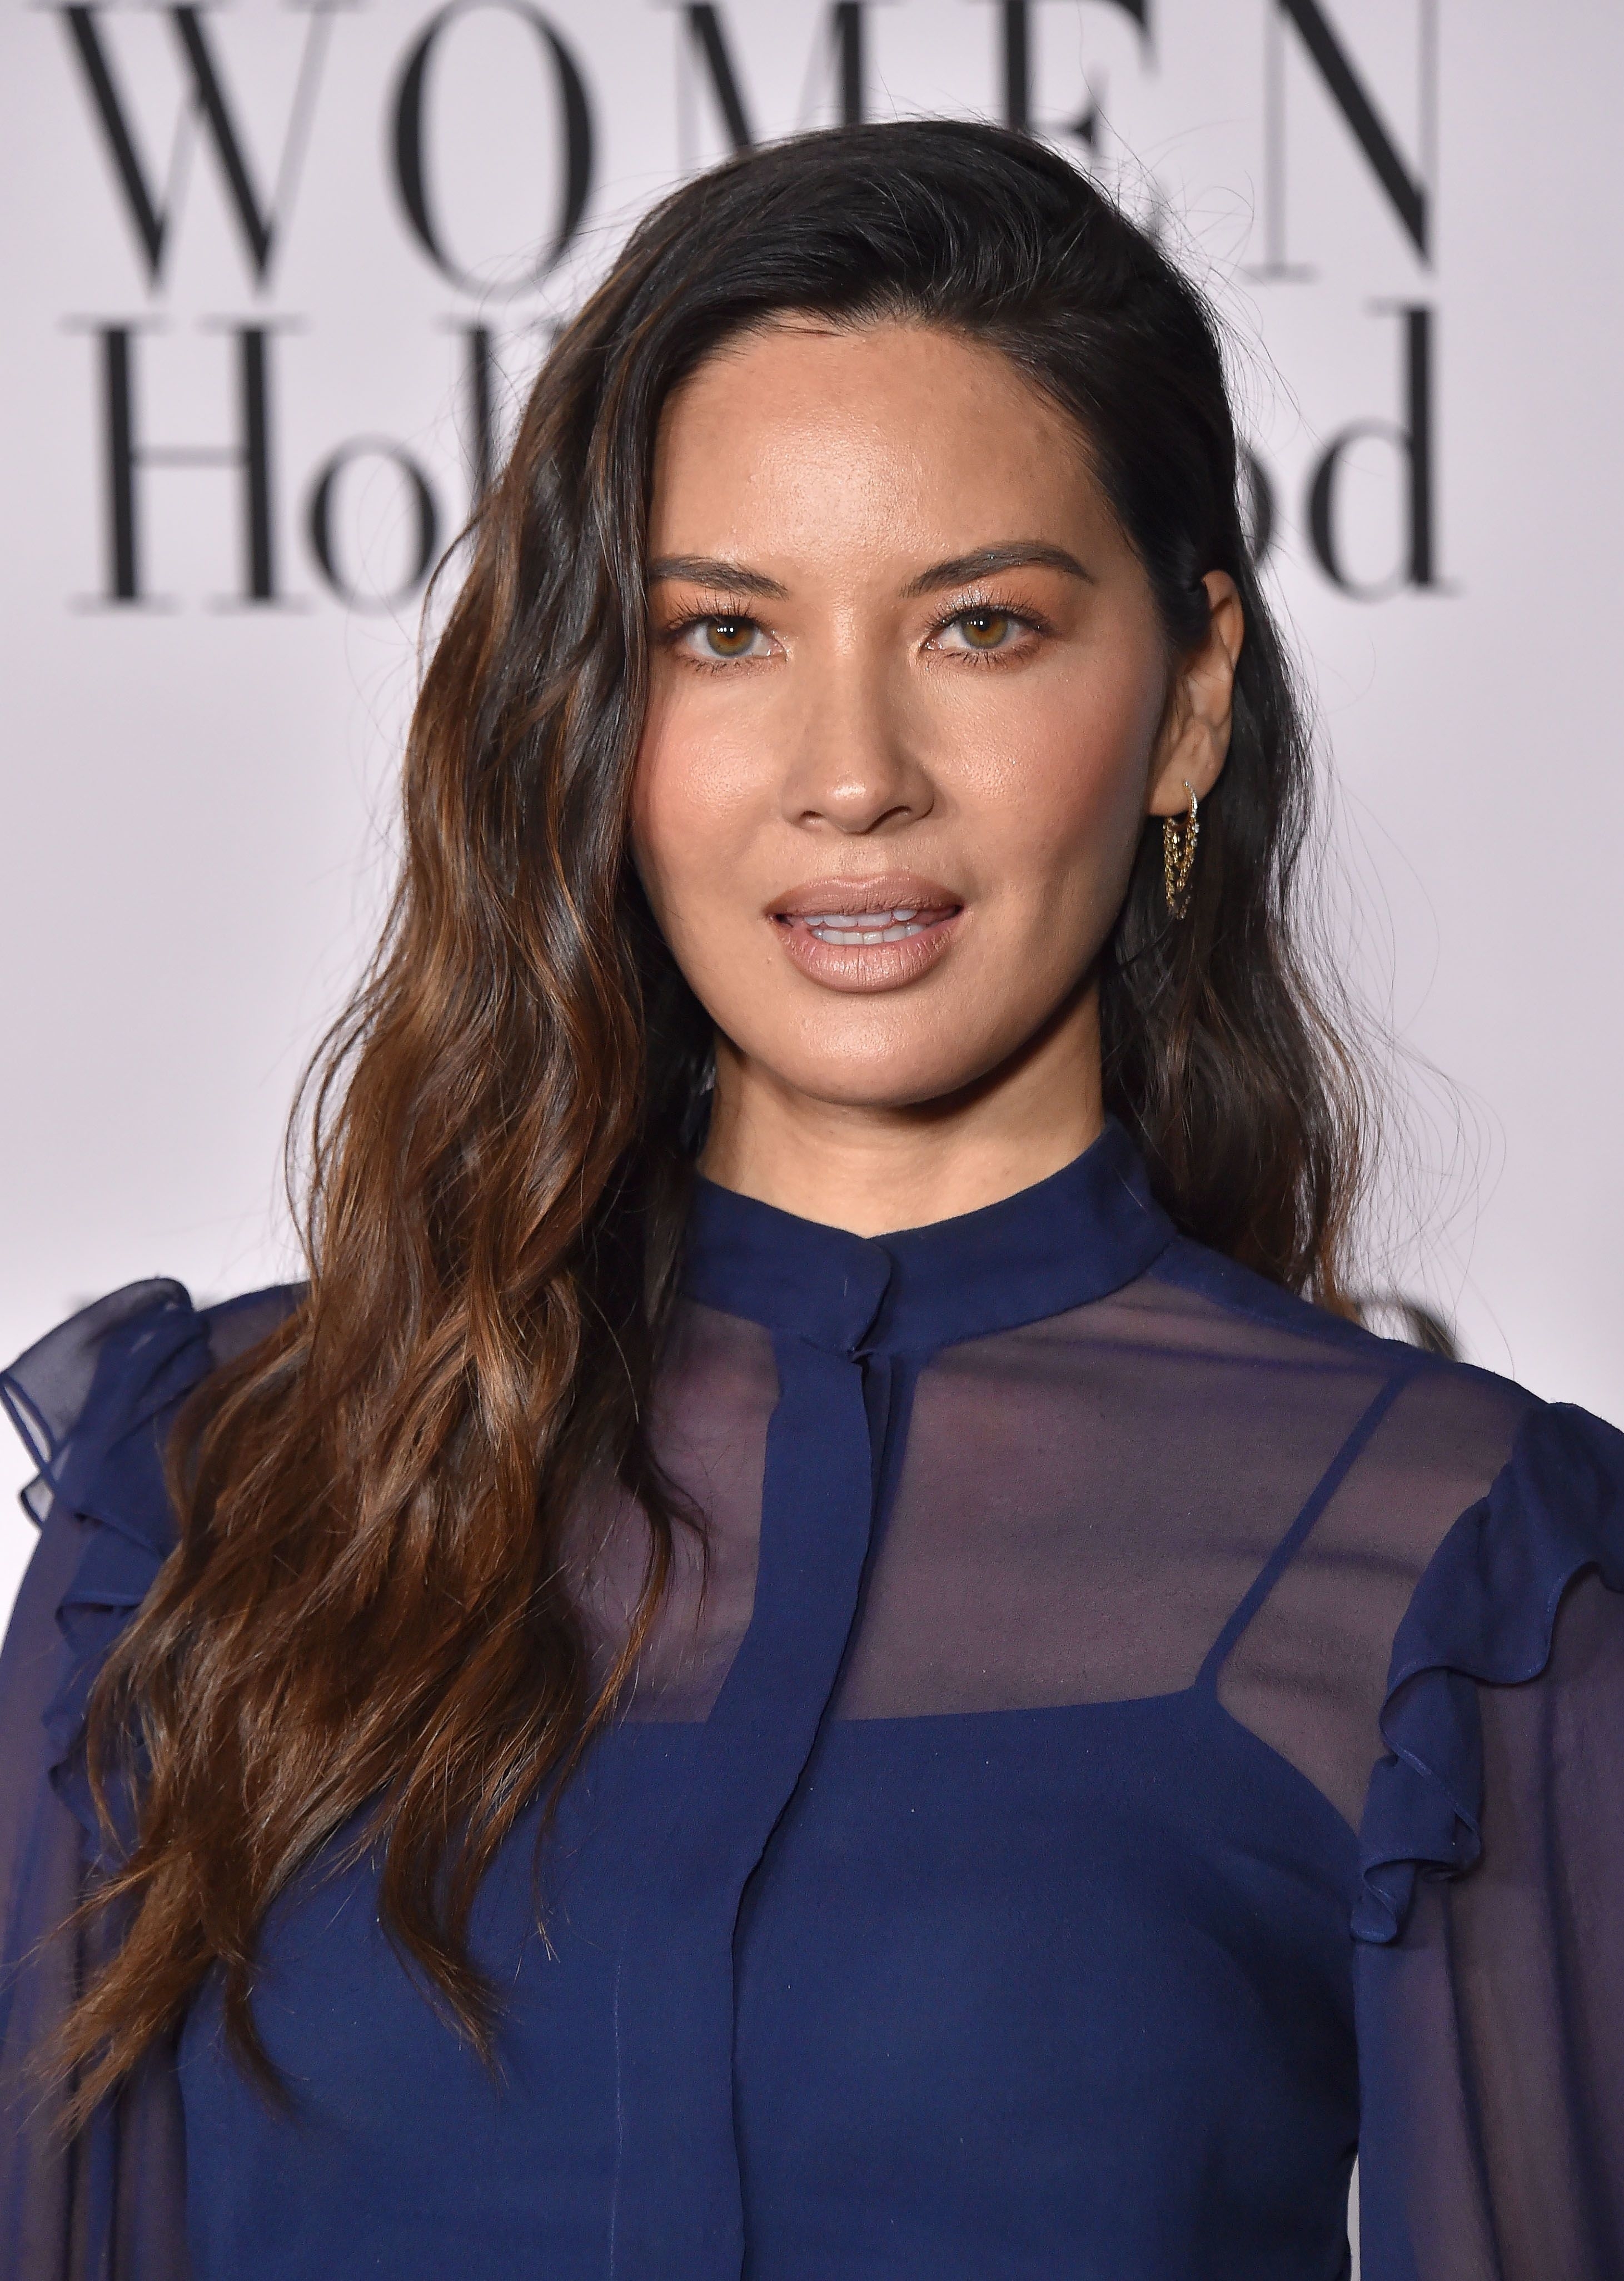 Olivia Munn in a sheer-sleeved blouse posing for a photo